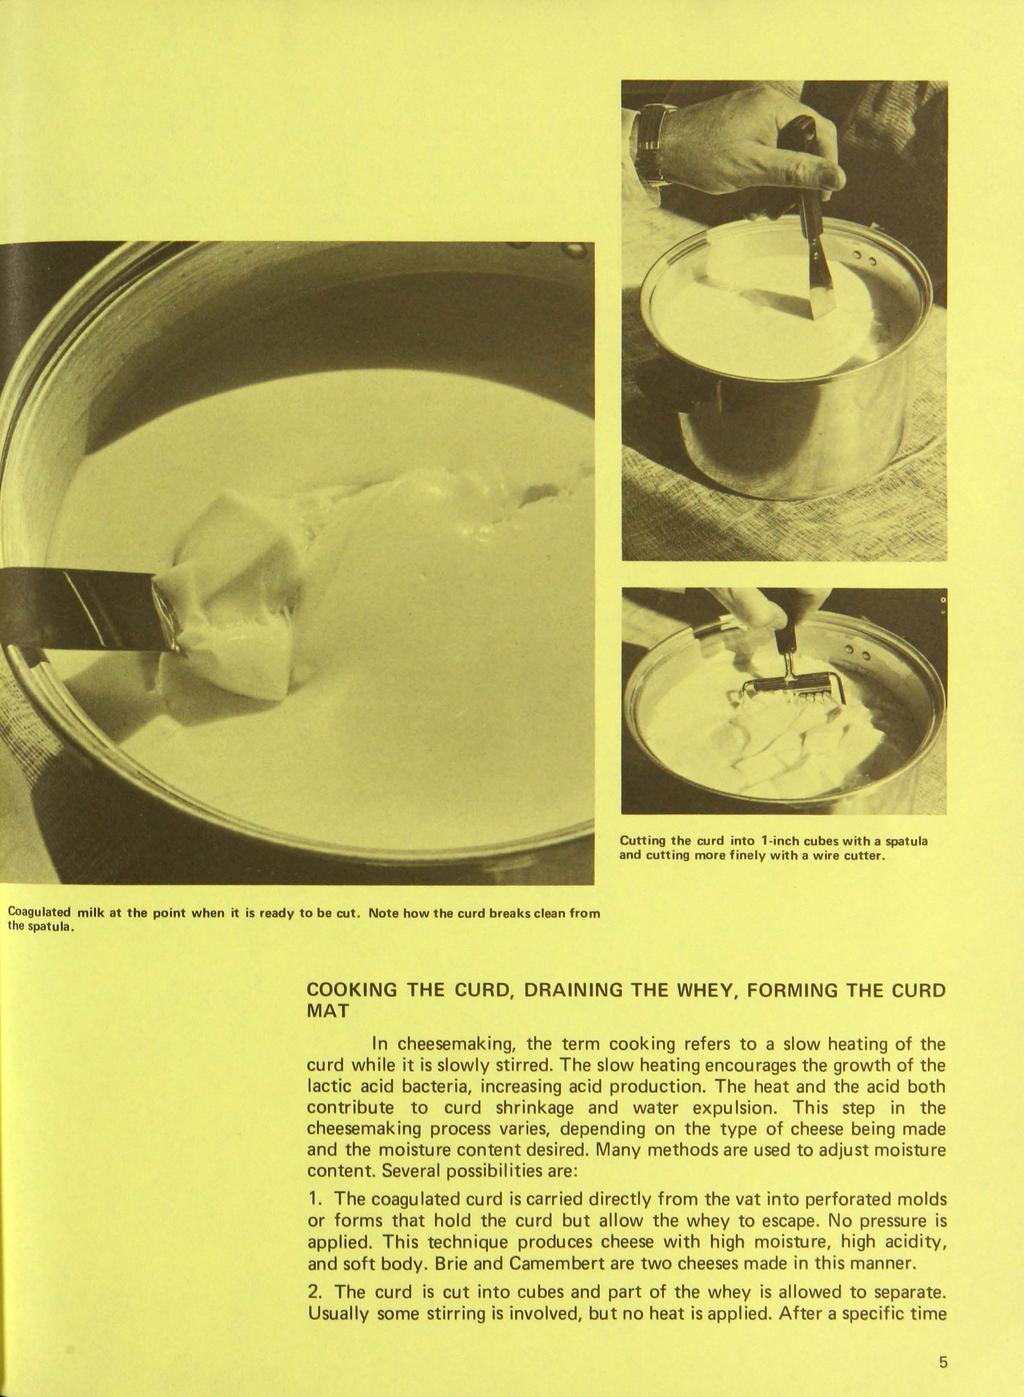 Cutting the curd into 1 inch cubes with a spatula and cutting more finely with a wire cutter. Coagulated milk at the point when it is ready to be cut. Note how the curd breaks clean from the spatula.